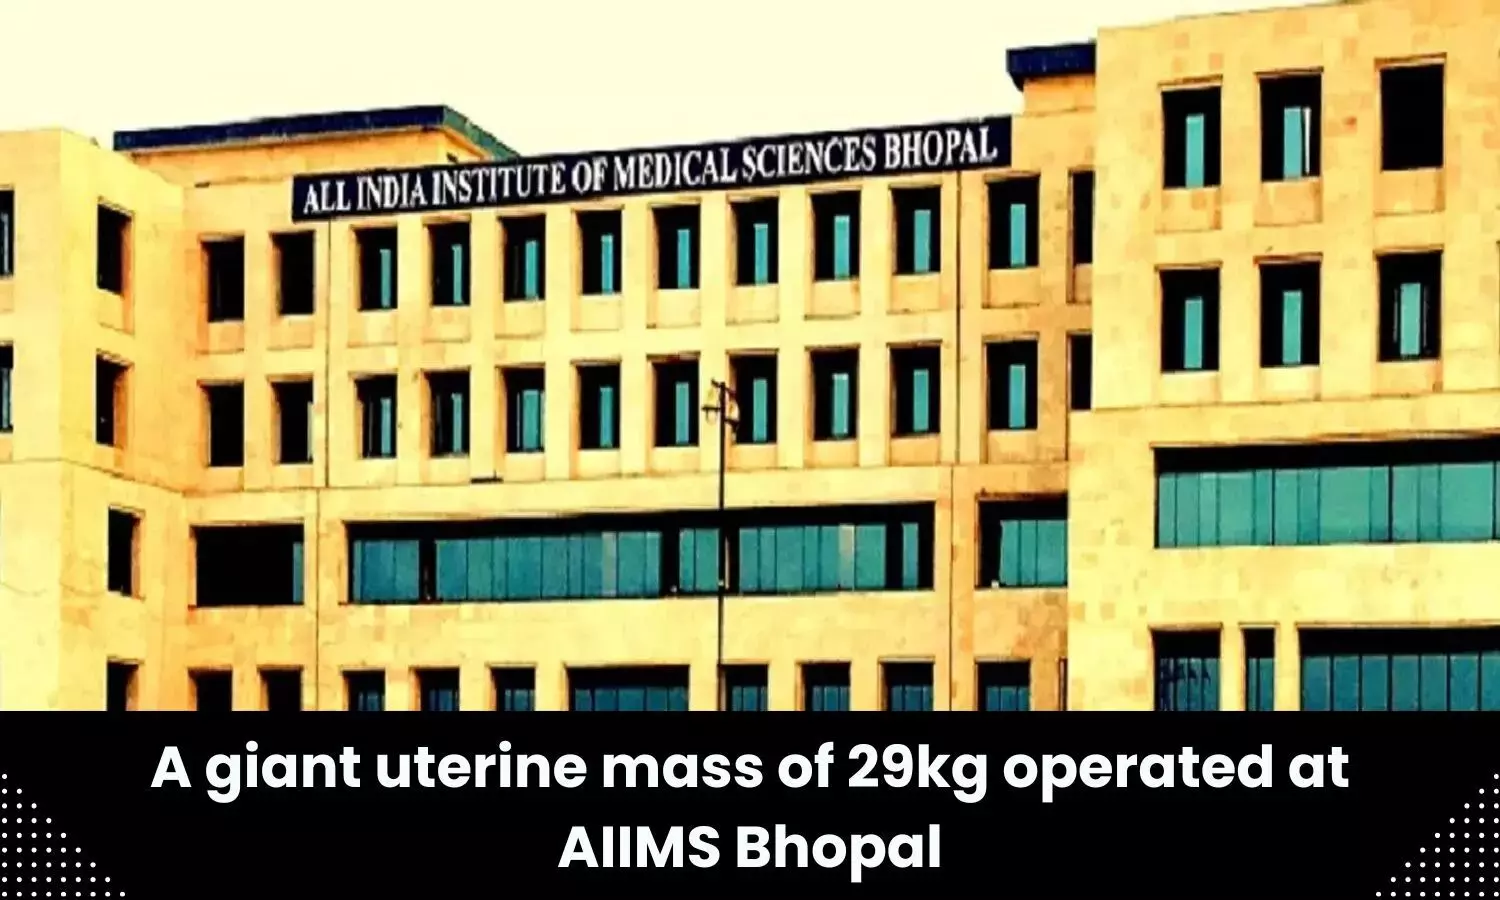 Giant uterine mass operated at AIIMS Bhopal